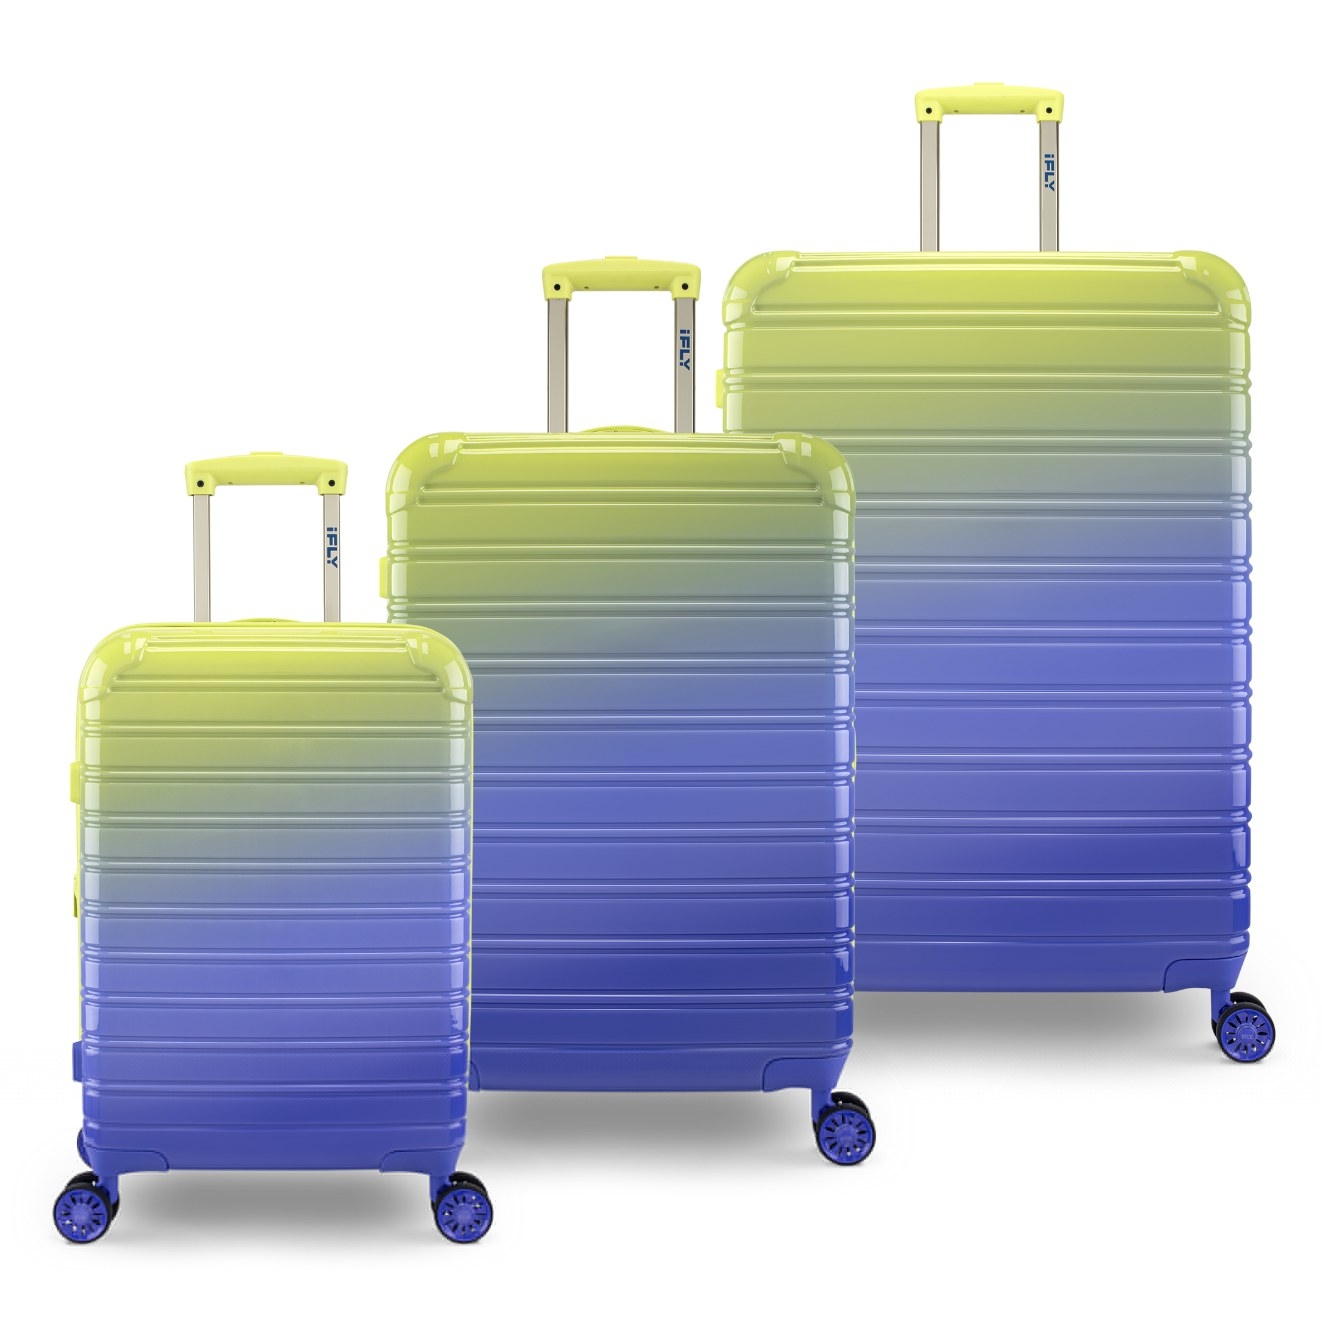 The blue and yellow ombre three-piece luggage set